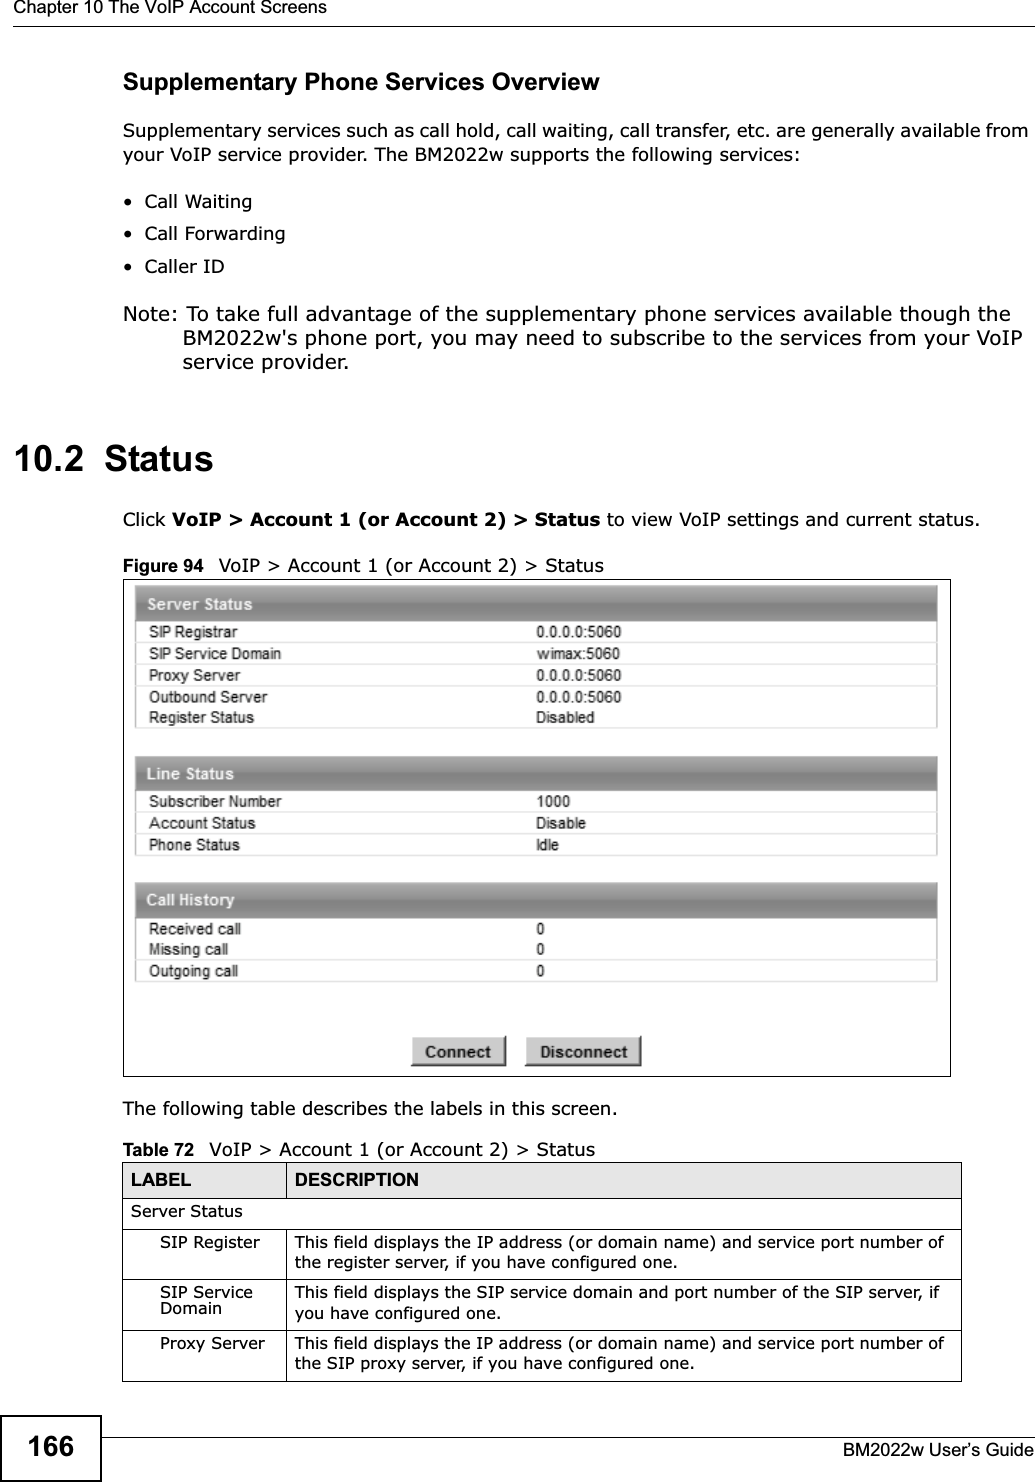 Chapter 10 The VoIP Account ScreensBM2022w User’s Guide166Supplementary Phone Services OverviewSupplementary services such as call hold, call waiting, call transfer, etc. are generally available from your VoIP service provider. The BM2022w supports the following services:• Call Waiting• Call Forwarding•Caller IDNote: To take full advantage of the supplementary phone services available though the BM2022w&apos;s phone port, you may need to subscribe to the services from your VoIP service provider.10.2  StatusClick VoIP &gt; Account 1 (or Account 2) &gt; Status to view VoIP settings and current status.Figure 94   VoIP &gt; Account 1 (or Account 2) &gt; StatusThe following table describes the labels in this screen.Table 72   VoIP &gt; Account 1 (or Account 2) &gt; StatusLABEL DESCRIPTIONServer StatusSIP Register This field displays the IP address (or domain name) and service port number of the register server, if you have configured one.SIP Service Domain This field displays the SIP service domain and port number of the SIP server, if you have configured one.Proxy Server This field displays the IP address (or domain name) and service port number of the SIP proxy server, if you have configured one.